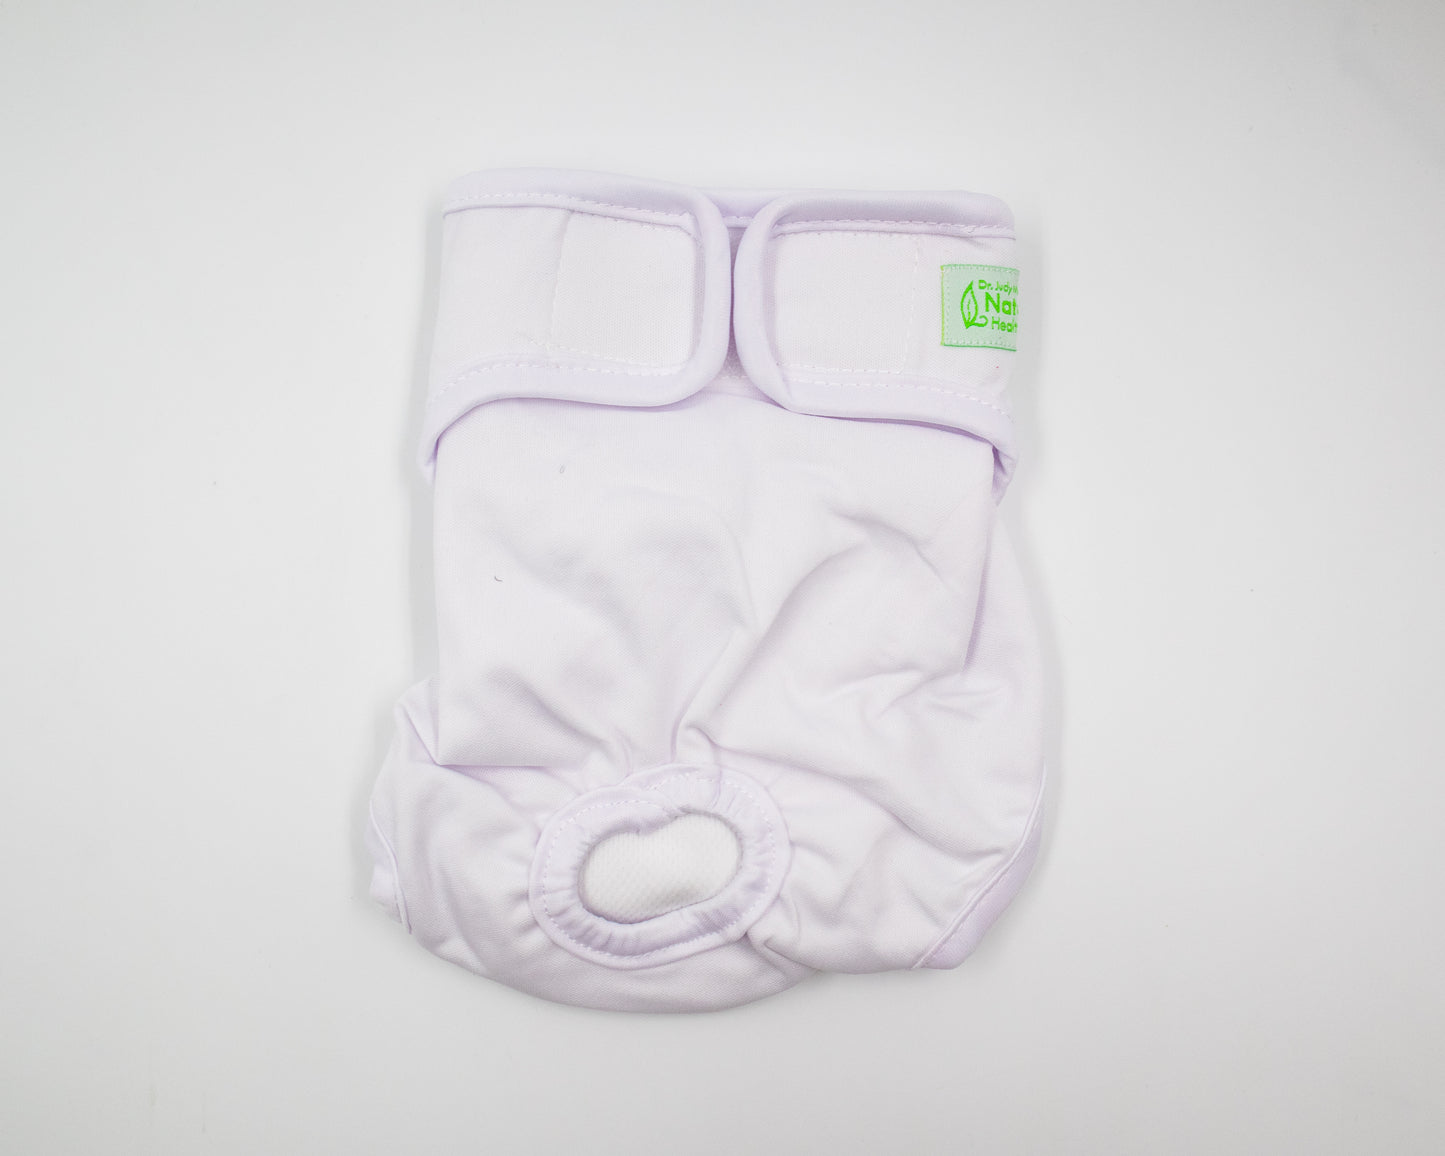 Female Diapers for Dogs & Cats (3 pack)